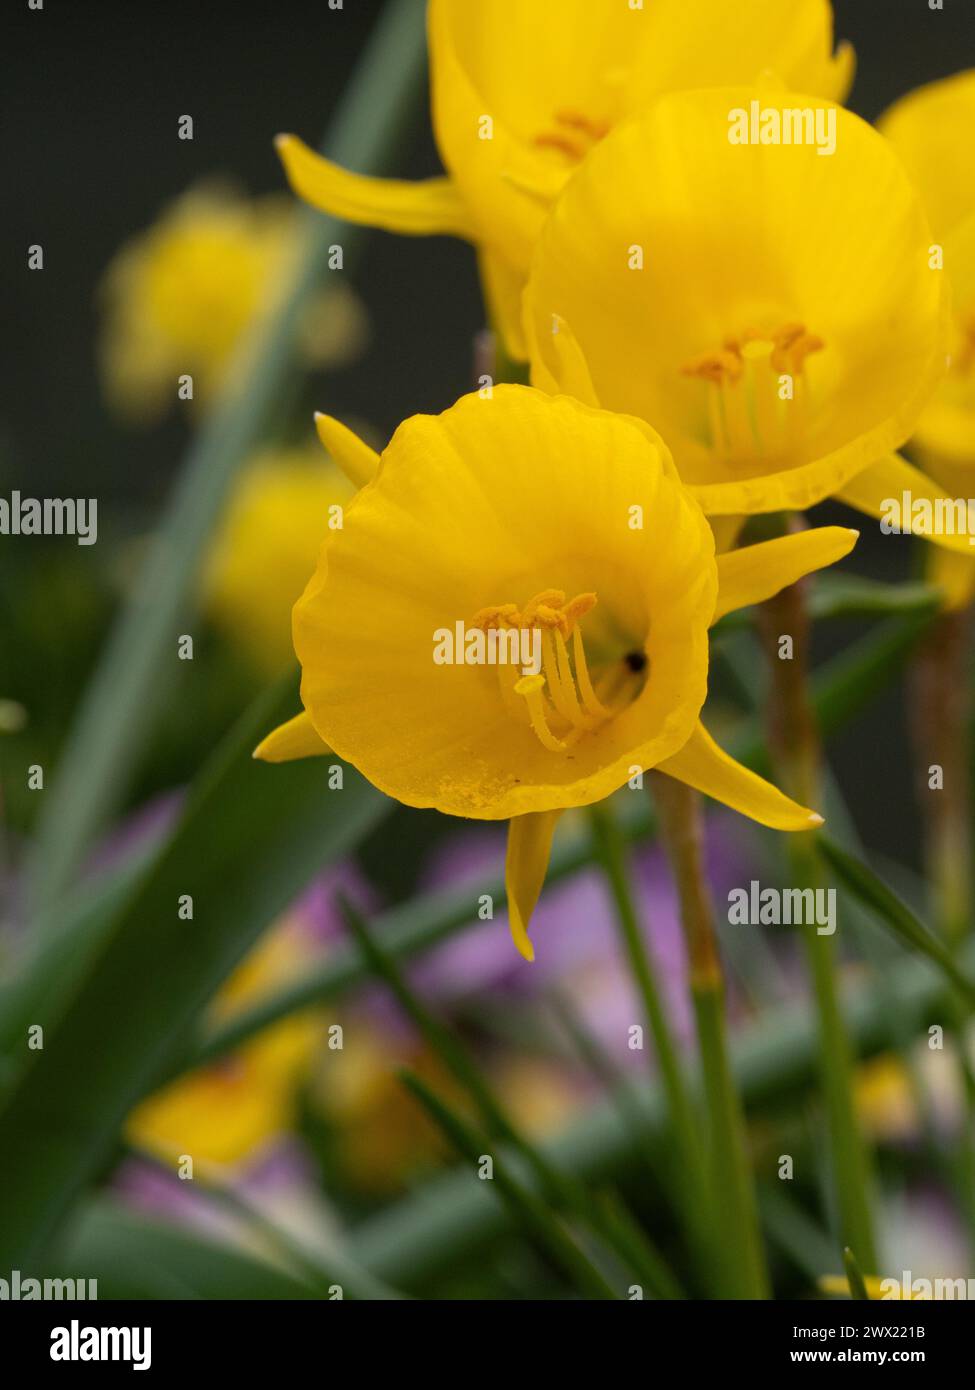 A group of the small delicate flowers of the miniature daffodil, Narcissus obesus Stock Photo